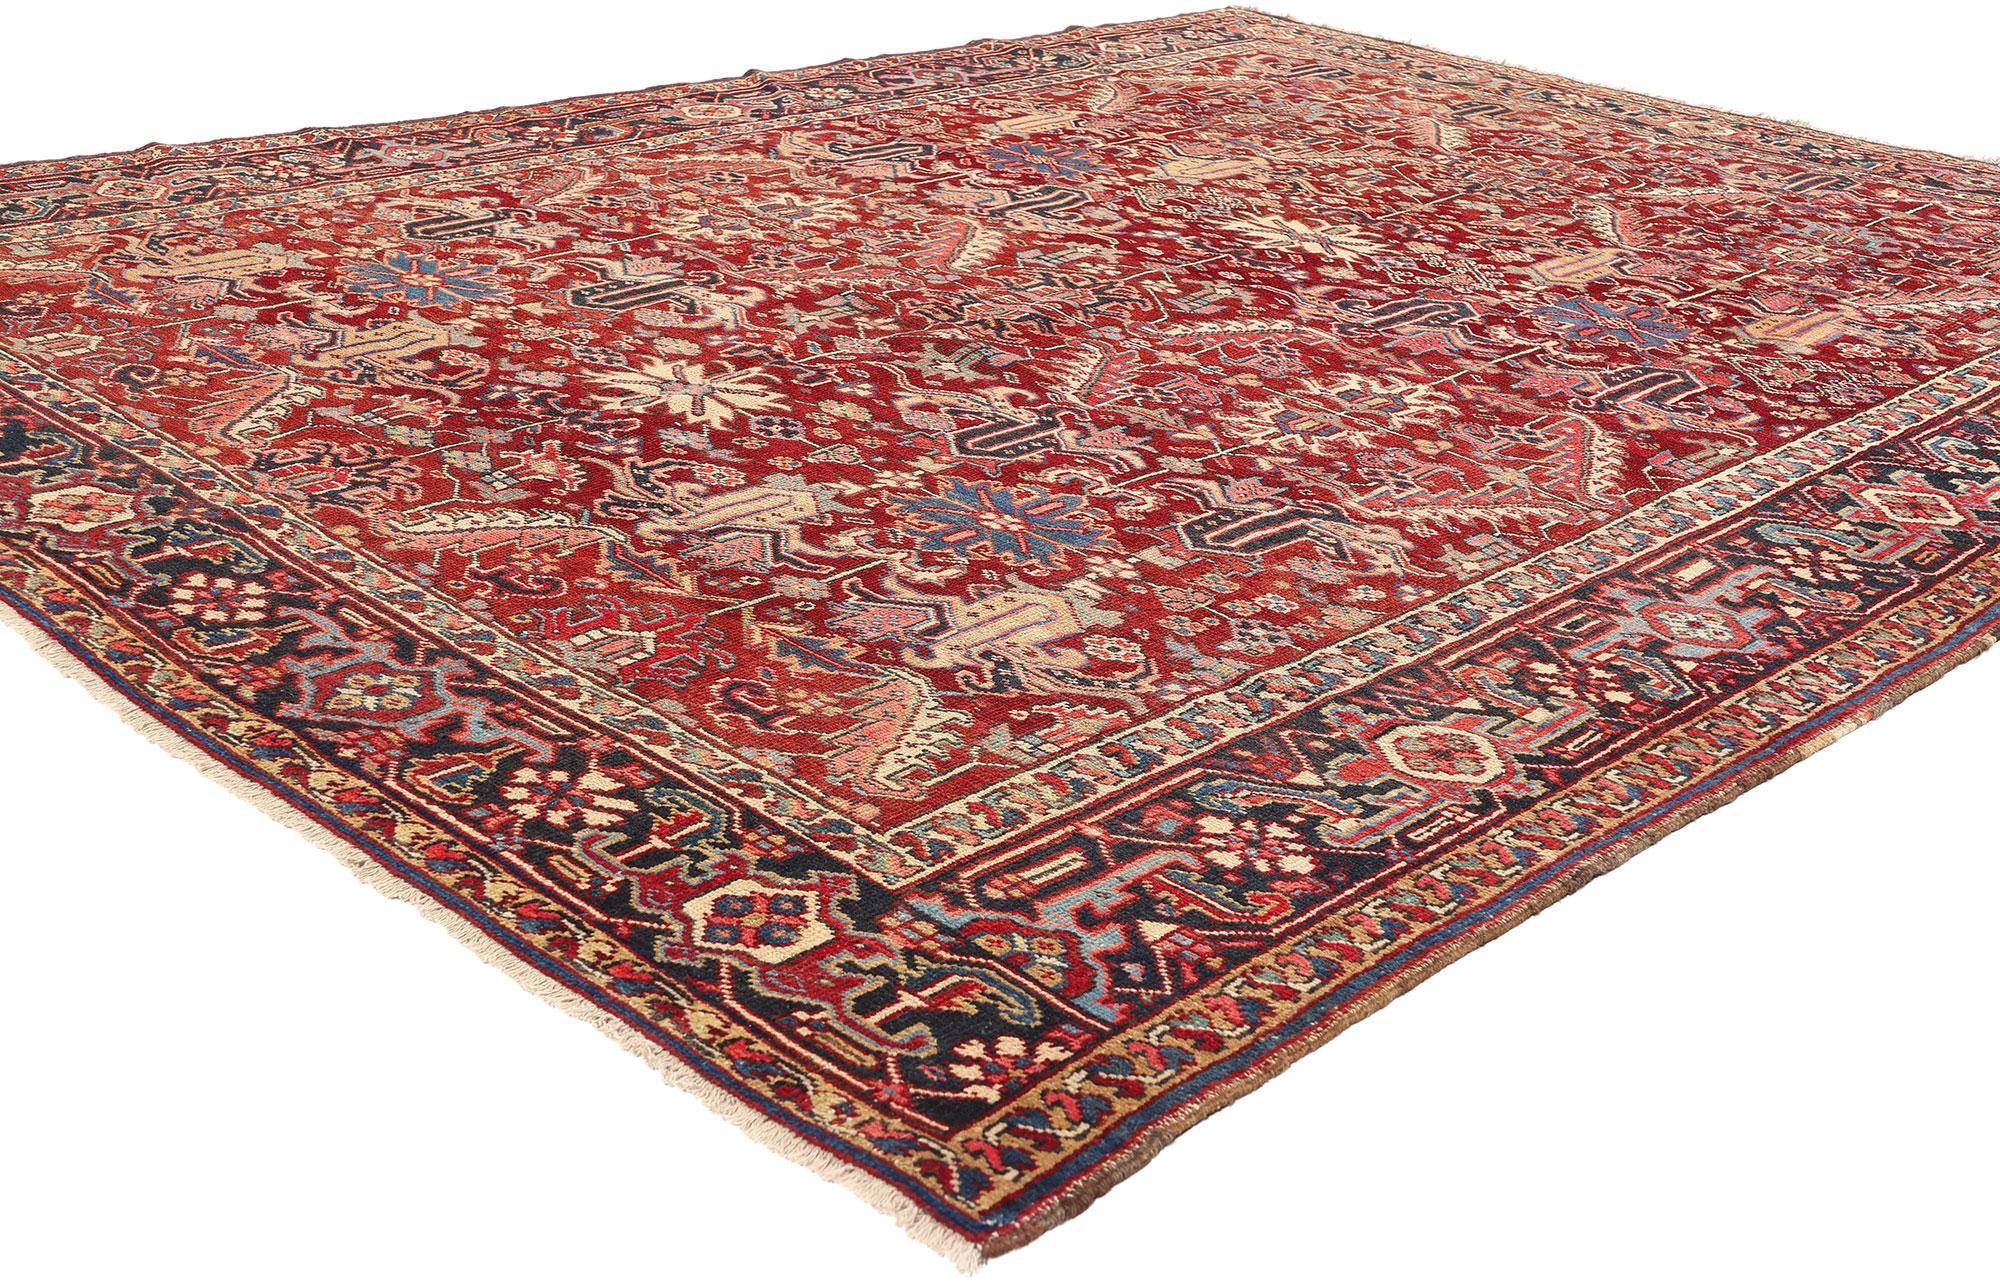 78767 Antique Persian Dragon Serapi Heriz Rug, 07'08 x 09'09. Antique Persian Dragon Serapi Heriz rugs, hailing from the Heriz region in Northwest Iran, are celebrated for their robust construction, striking geometric designs, and vibrant hues,